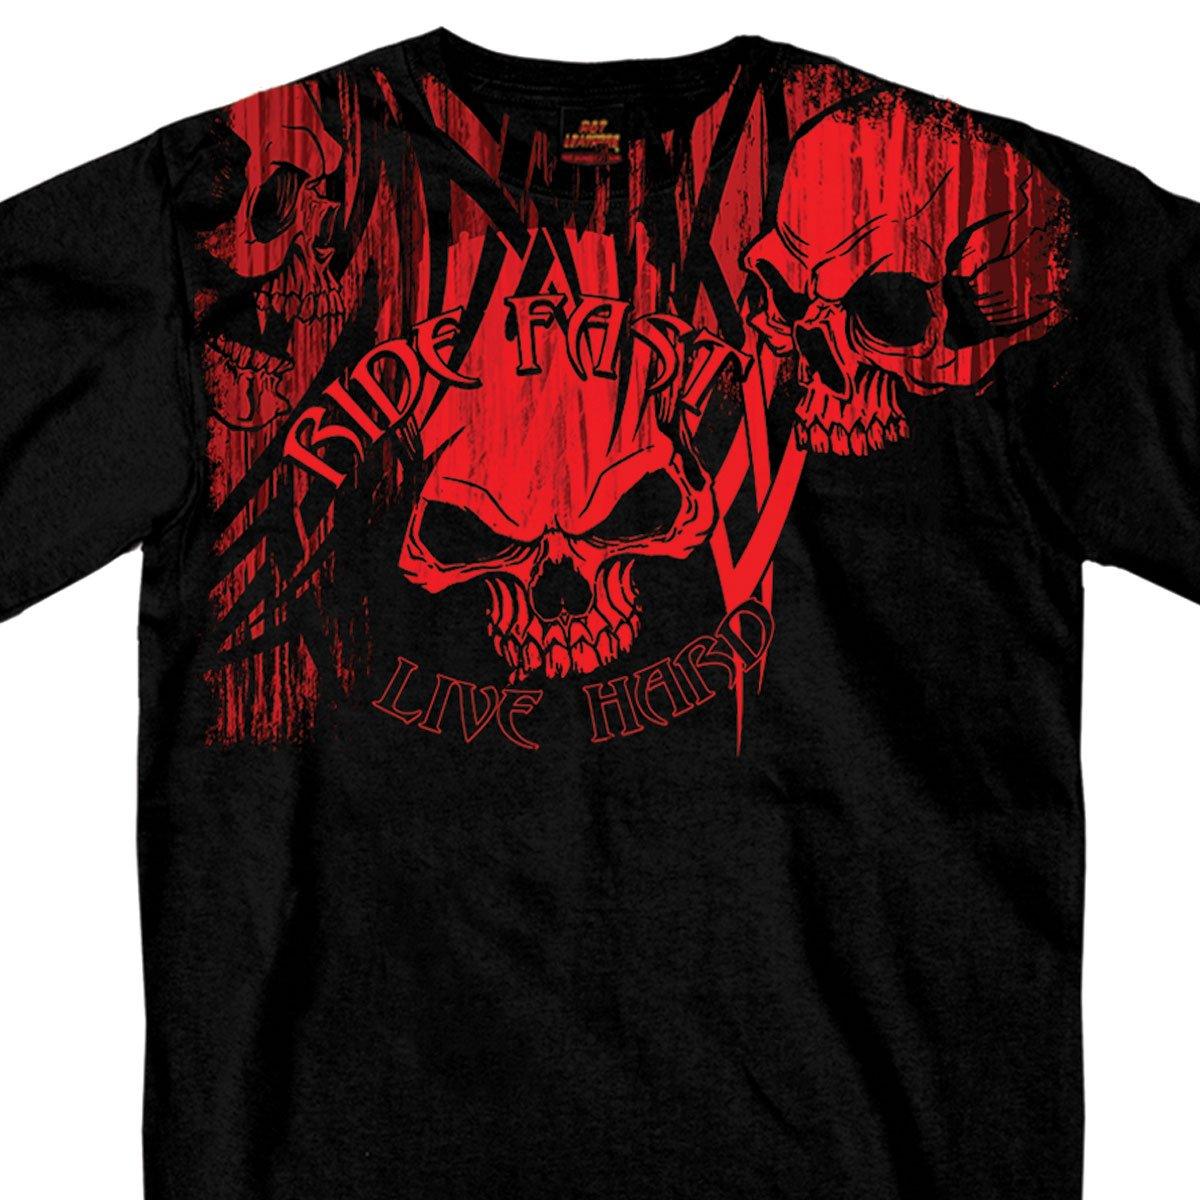 Hot Leathers Men's Over The Top Skull T-Shirt, Black - American Legend Rider